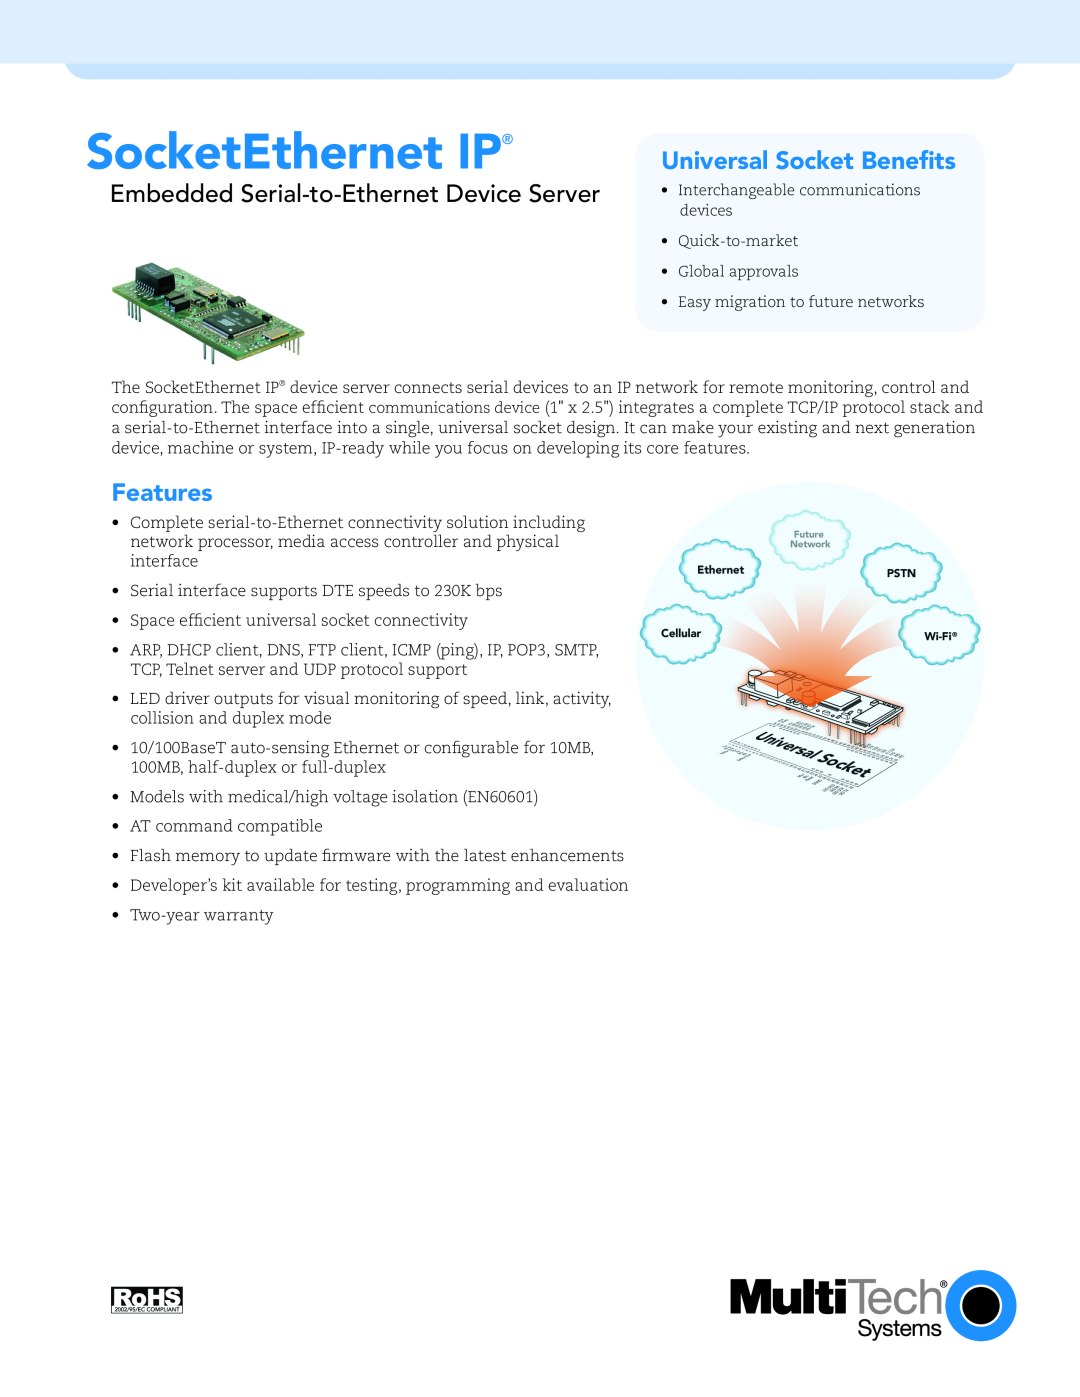 Multi-Tech Systems EN60601 warranty SocketEthernet IP, Embedded Serial-to-Ethernet Device Server, Features 